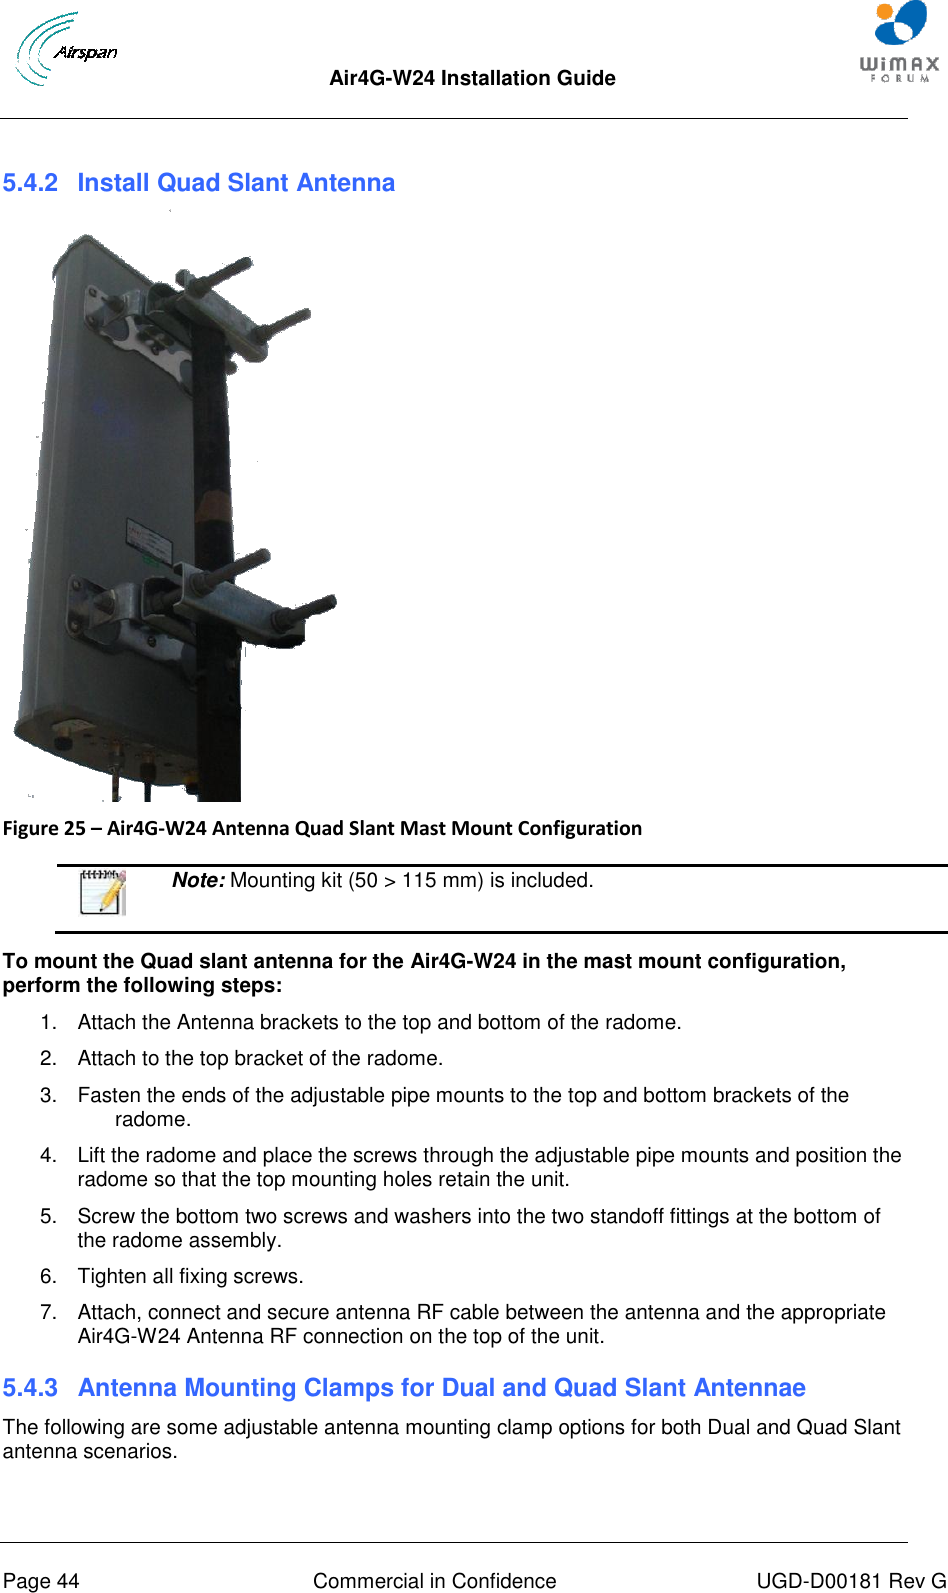  Air4G-W24 Installation Guide       Page 44  Commercial in Confidence  UGD-D00181 Rev G  5.4.2  Install Quad Slant Antenna    Figure 25 – Air4G-W24 Antenna Quad Slant Mast Mount Configuration    Note: Mounting kit (50 &gt; 115 mm) is included.  To mount the Quad slant antenna for the Air4G-W24 in the mast mount configuration, perform the following steps: 1.  Attach the Antenna brackets to the top and bottom of the radome.  2.  Attach to the top bracket of the radome. 3.  Fasten the ends of the adjustable pipe mounts to the top and bottom brackets of the radome. 4.  Lift the radome and place the screws through the adjustable pipe mounts and position the radome so that the top mounting holes retain the unit. 5.  Screw the bottom two screws and washers into the two standoff fittings at the bottom of the radome assembly. 6.  Tighten all fixing screws. 7.  Attach, connect and secure antenna RF cable between the antenna and the appropriate Air4G-W24 Antenna RF connection on the top of the unit. 5.4.3  Antenna Mounting Clamps for Dual and Quad Slant Antennae The following are some adjustable antenna mounting clamp options for both Dual and Quad Slant antenna scenarios.  